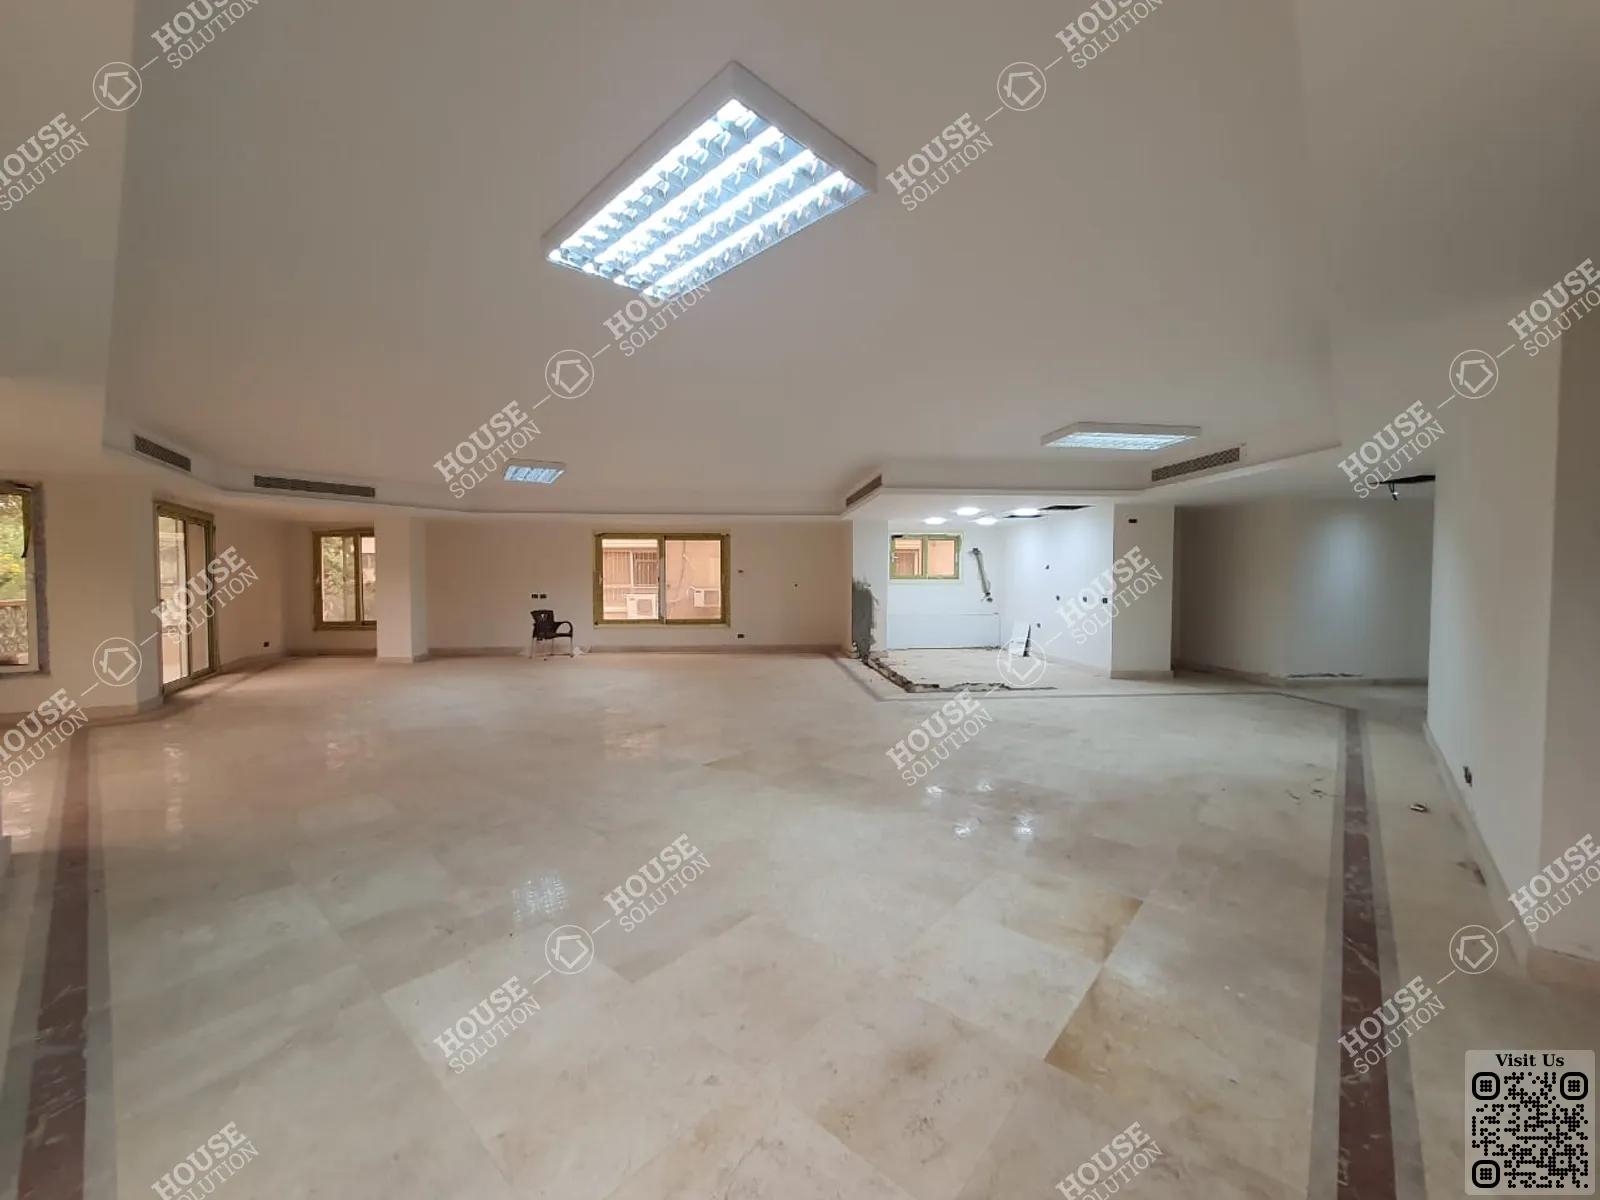 RECEPTION  @ Office spaces For Rent In Maadi Maadi Sarayat Area: 2500 m² consists of 16 Bedrooms 16 Bathrooms Semi furnished 5 stars #5435-1